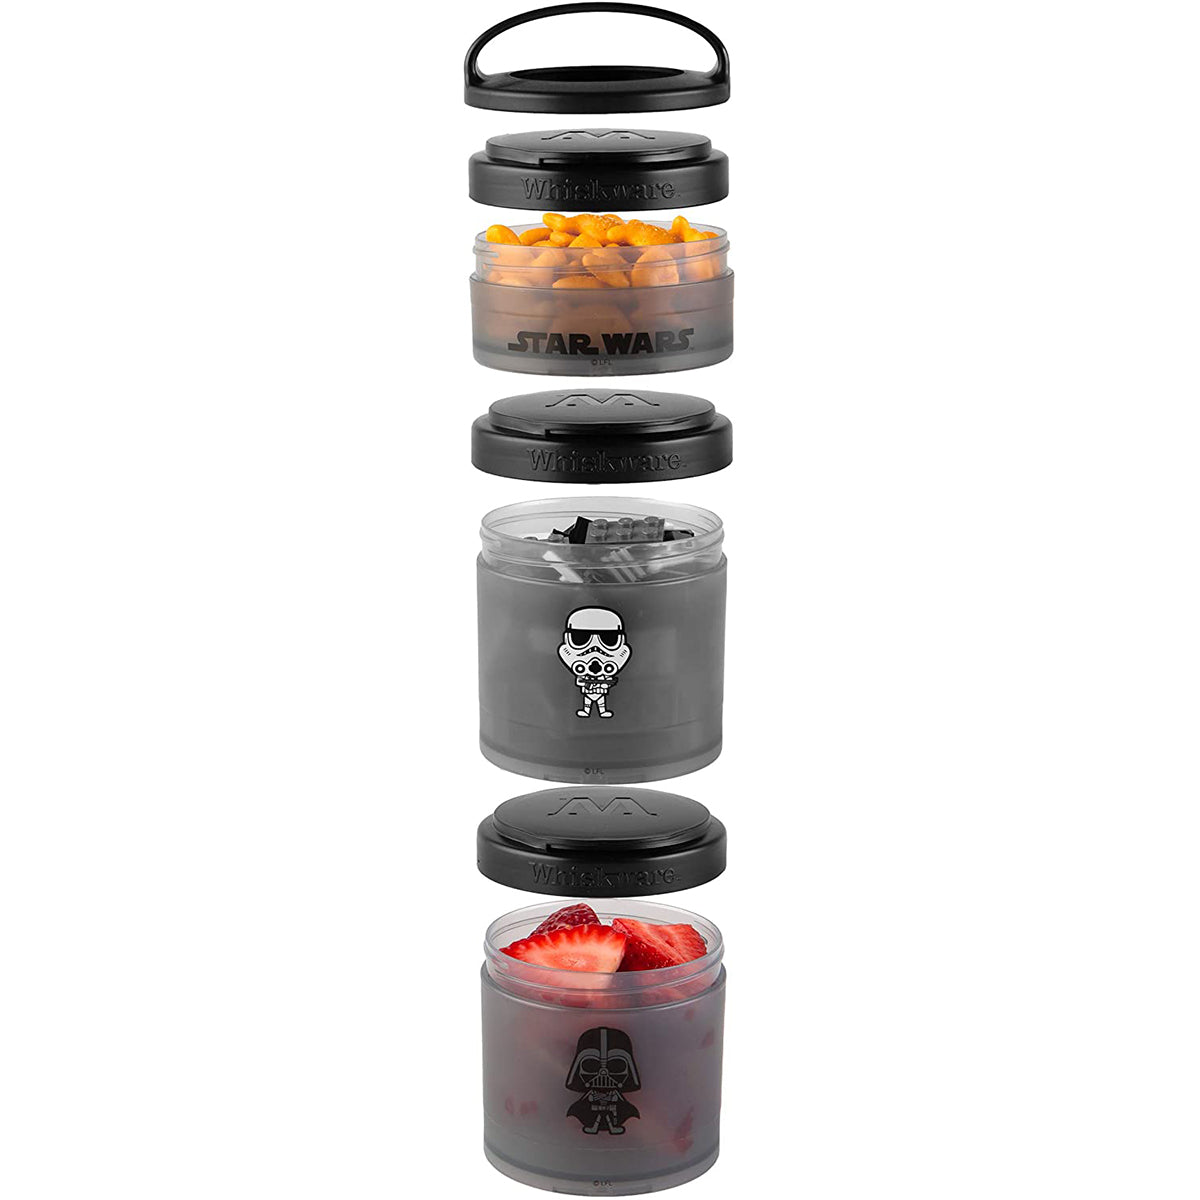 Whiskware Star Wars Stackable Snack Pack Containers - Leia & Rey